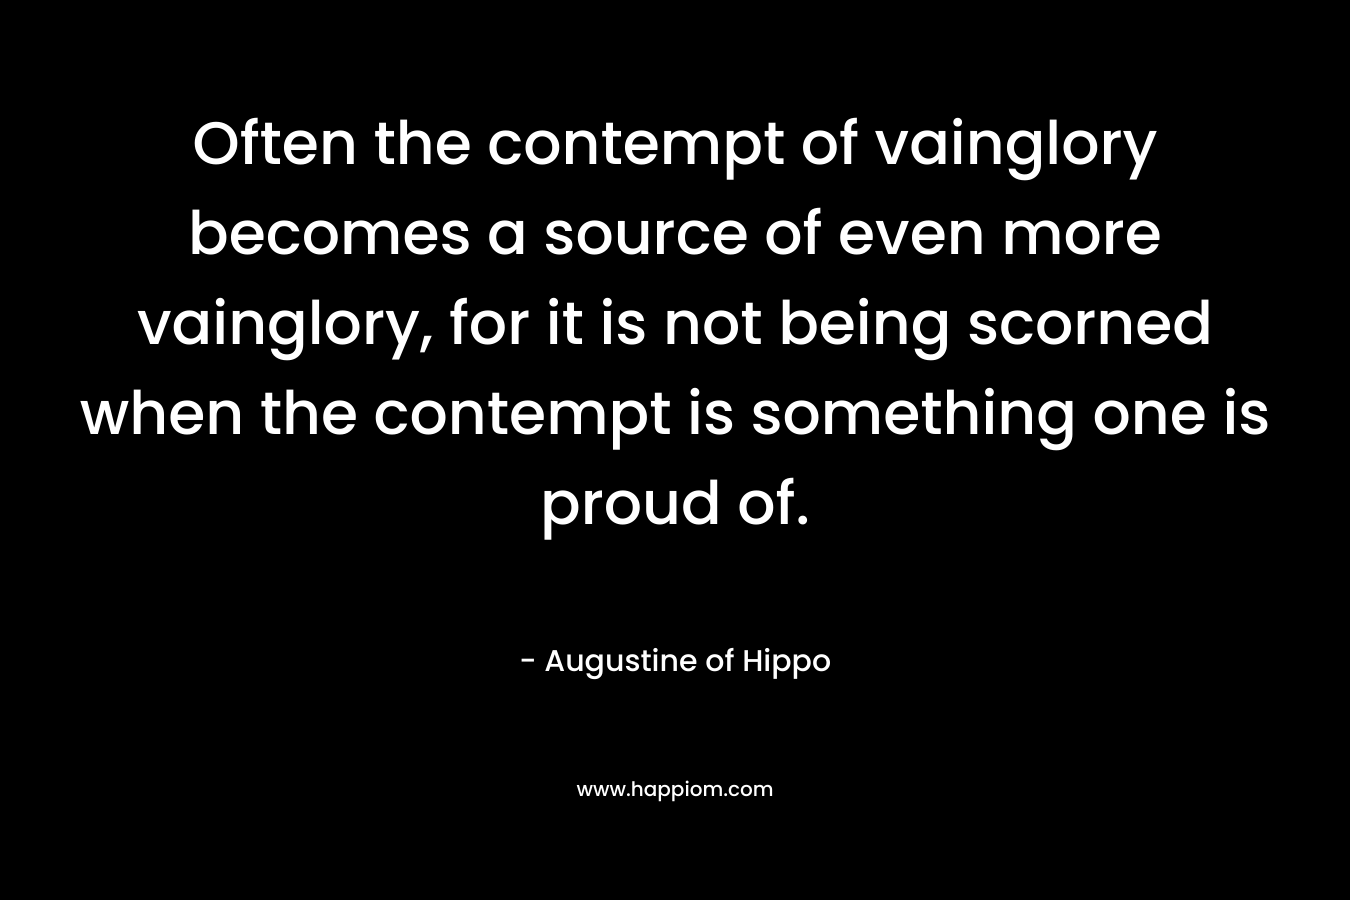 Often the contempt of vainglory becomes a source of even more vainglory, for it is not being scorned when the contempt is something one is proud of. – Augustine of Hippo